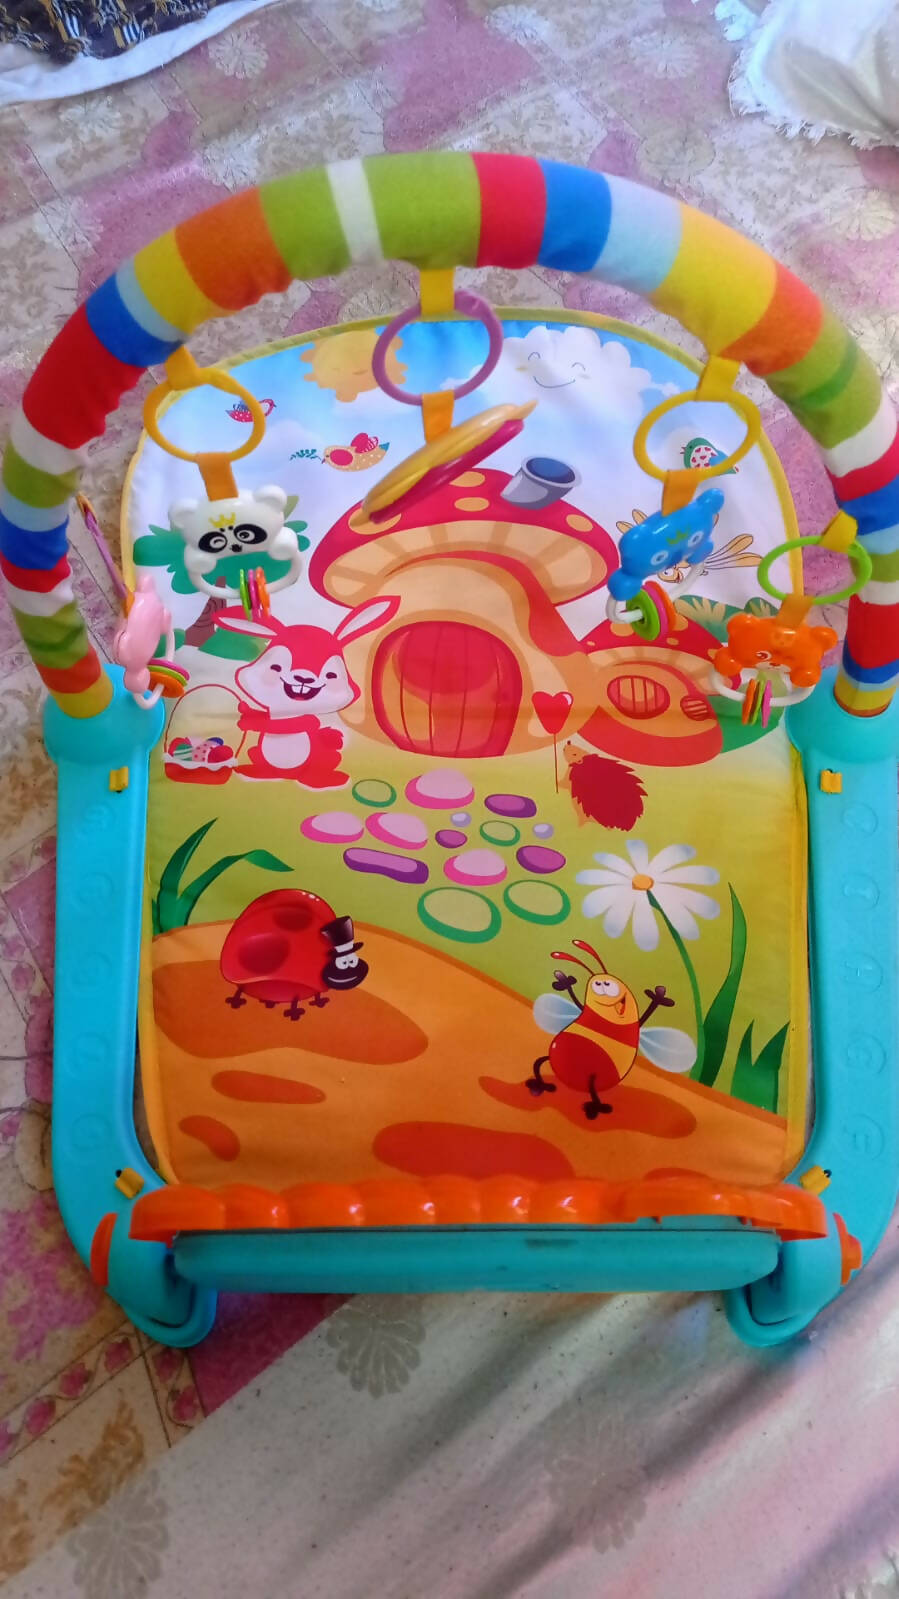 Playgym for Baby - Planet of Toys - PyaraBaby